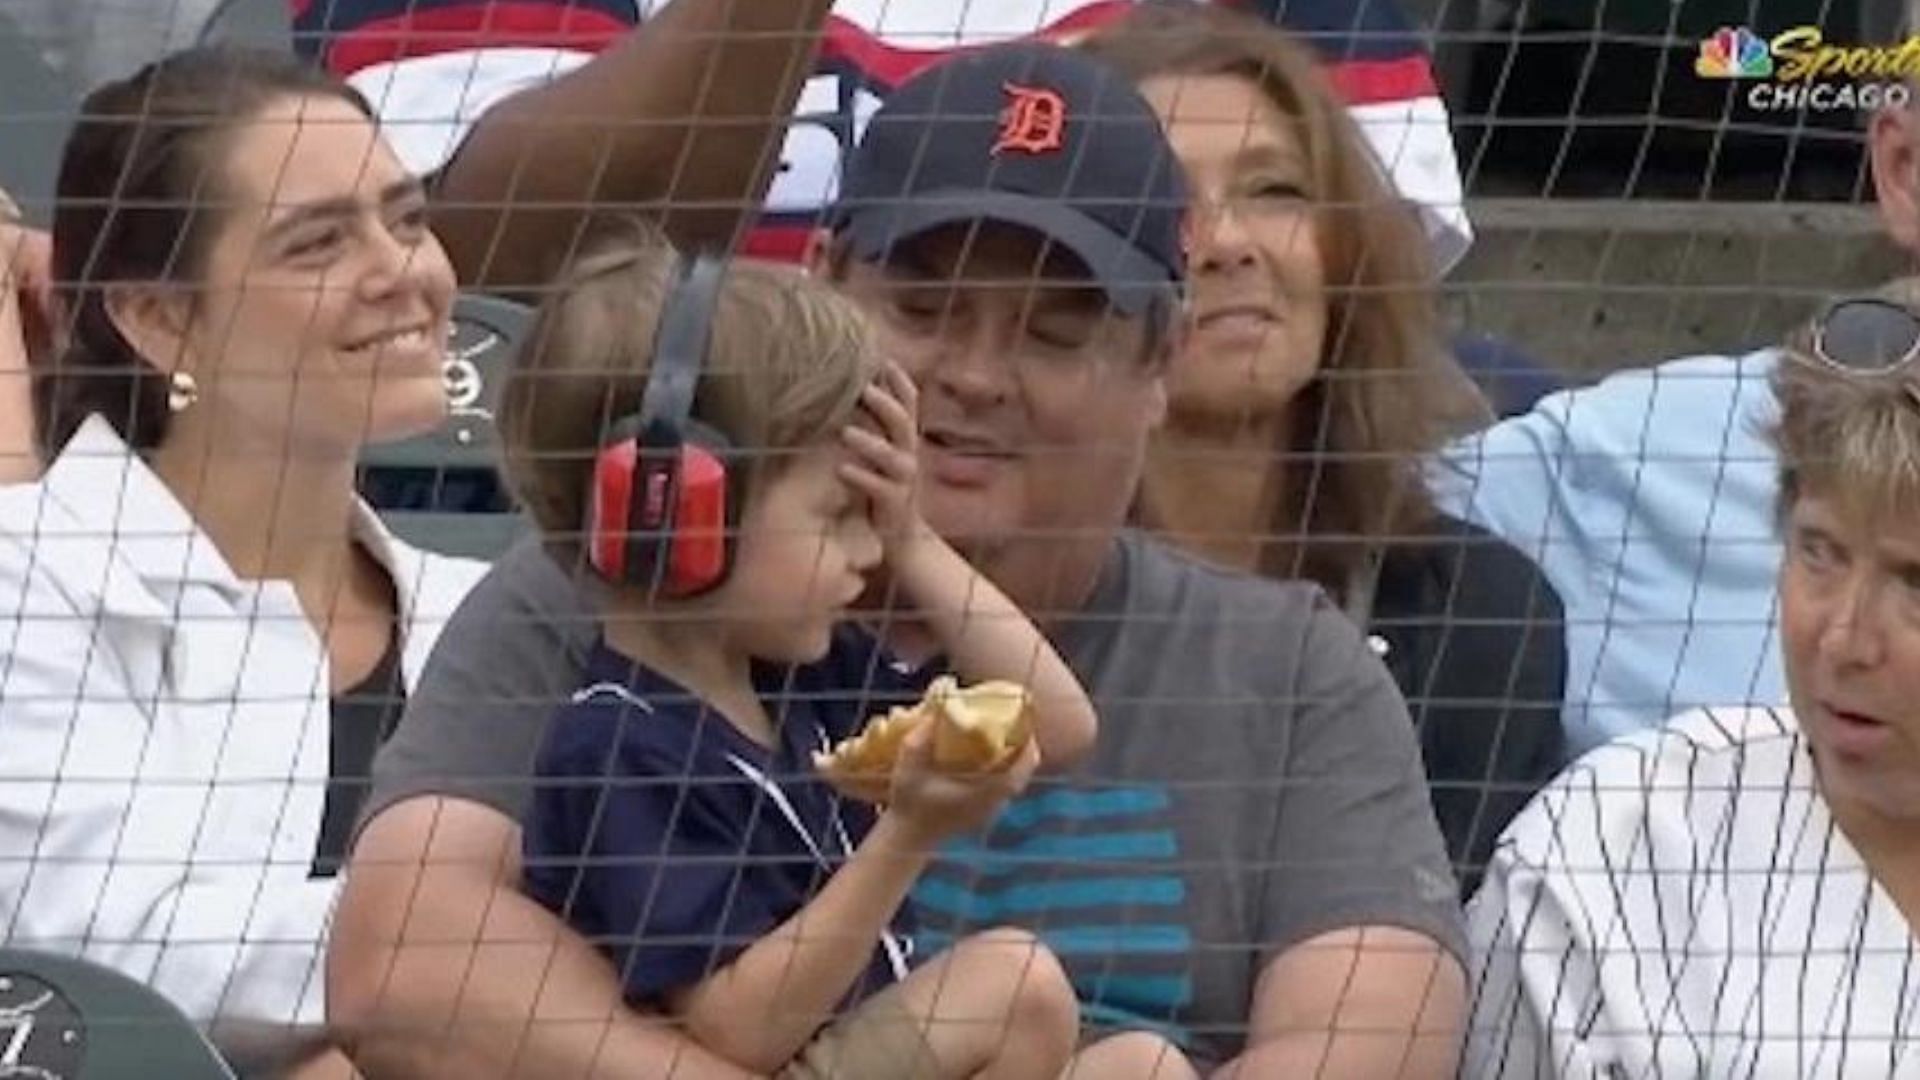 Young fan hit by foul ball during Yankee game